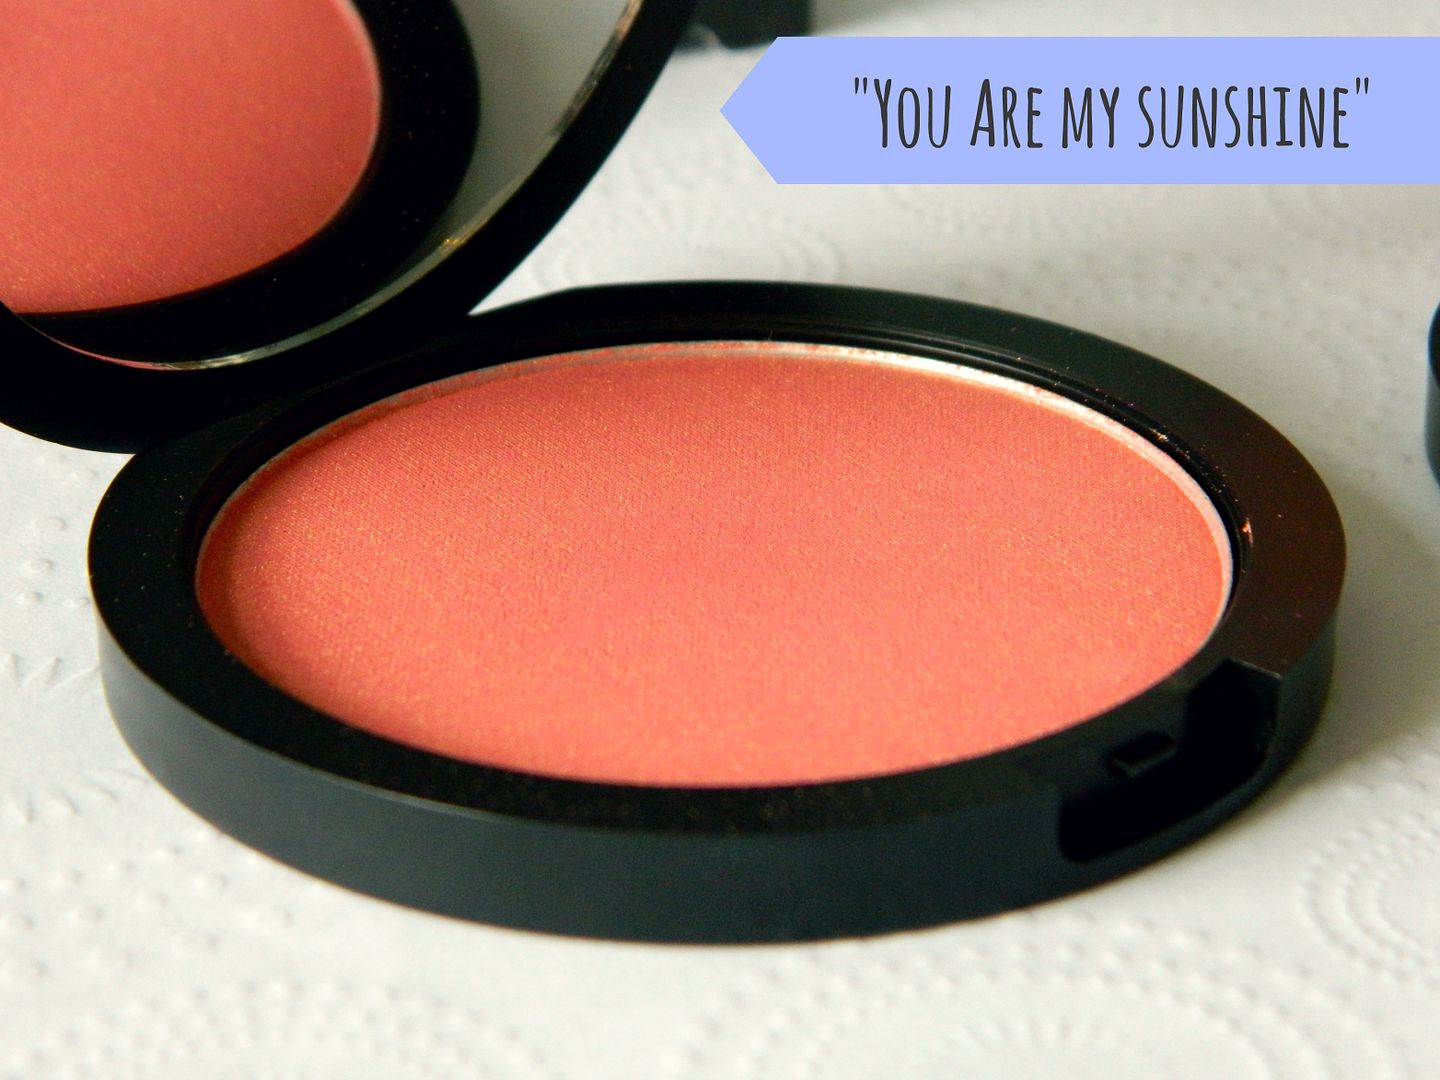 Dainty Doll Powder Blusher in You Are My Sunshine